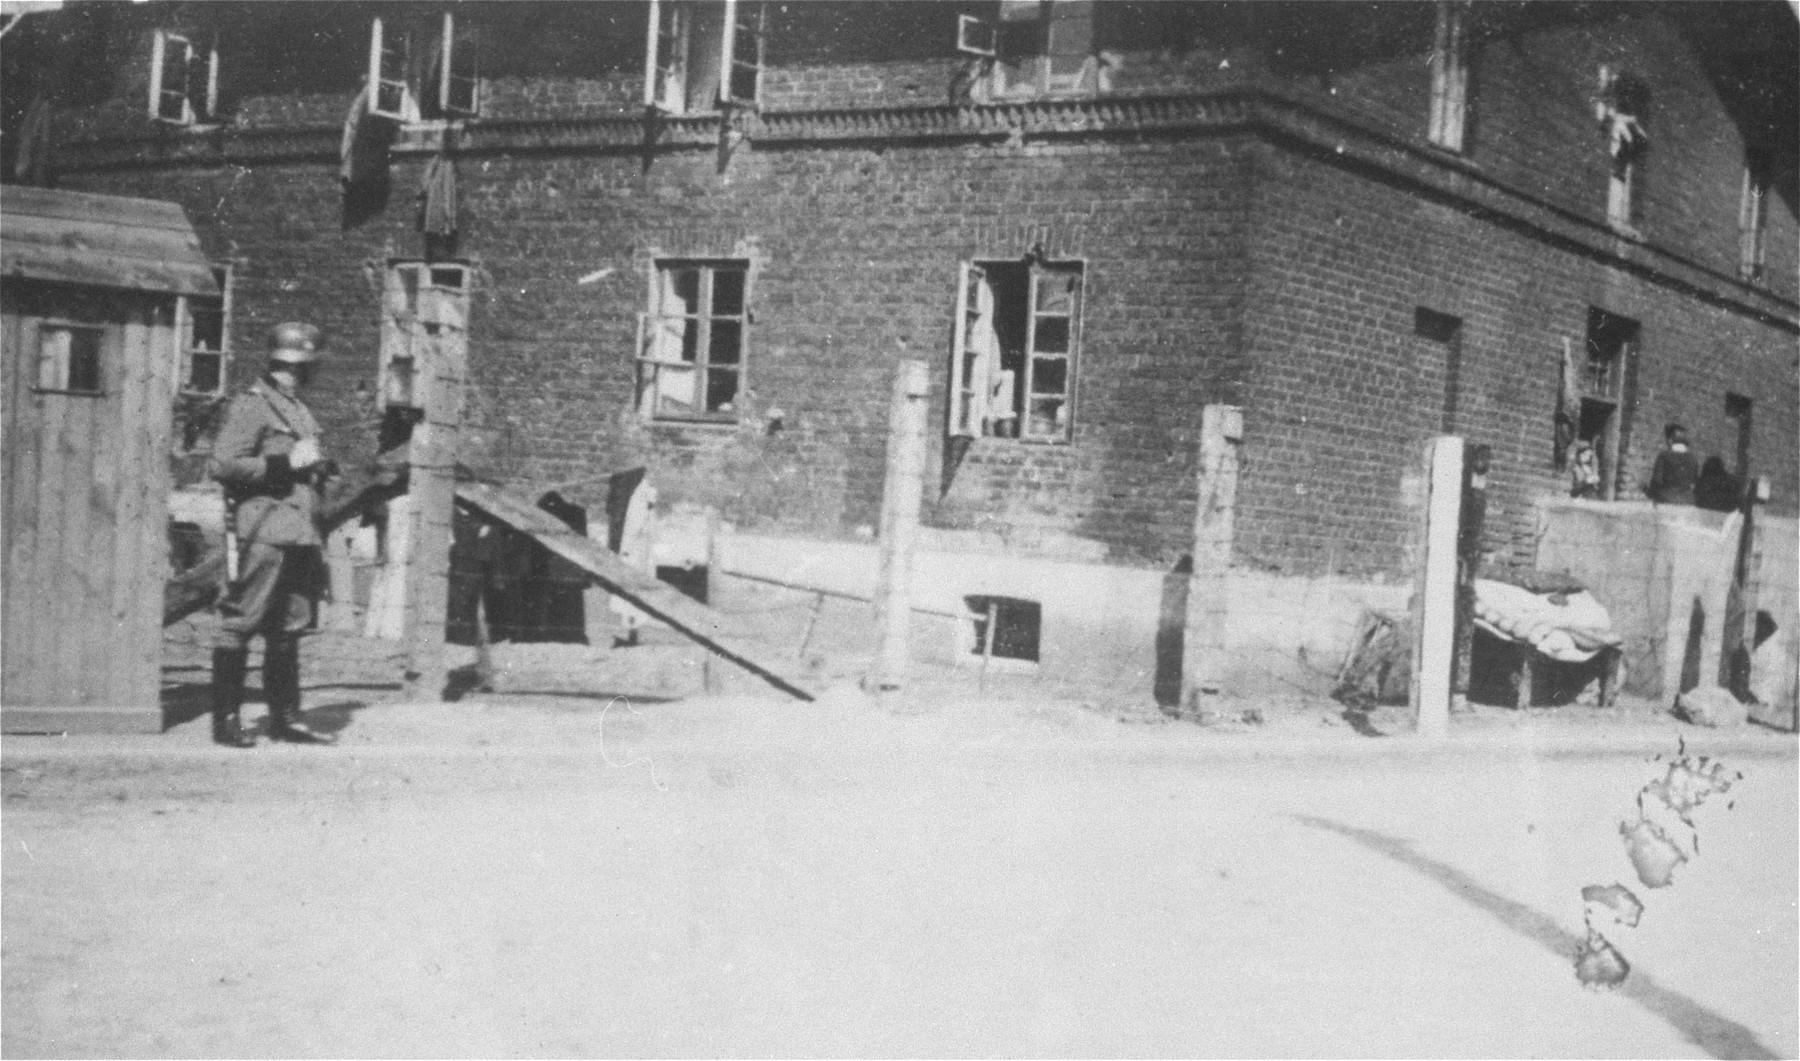 A German soldier stands guard at the entrance to the Kutno ghetto on Mickiewicz street.